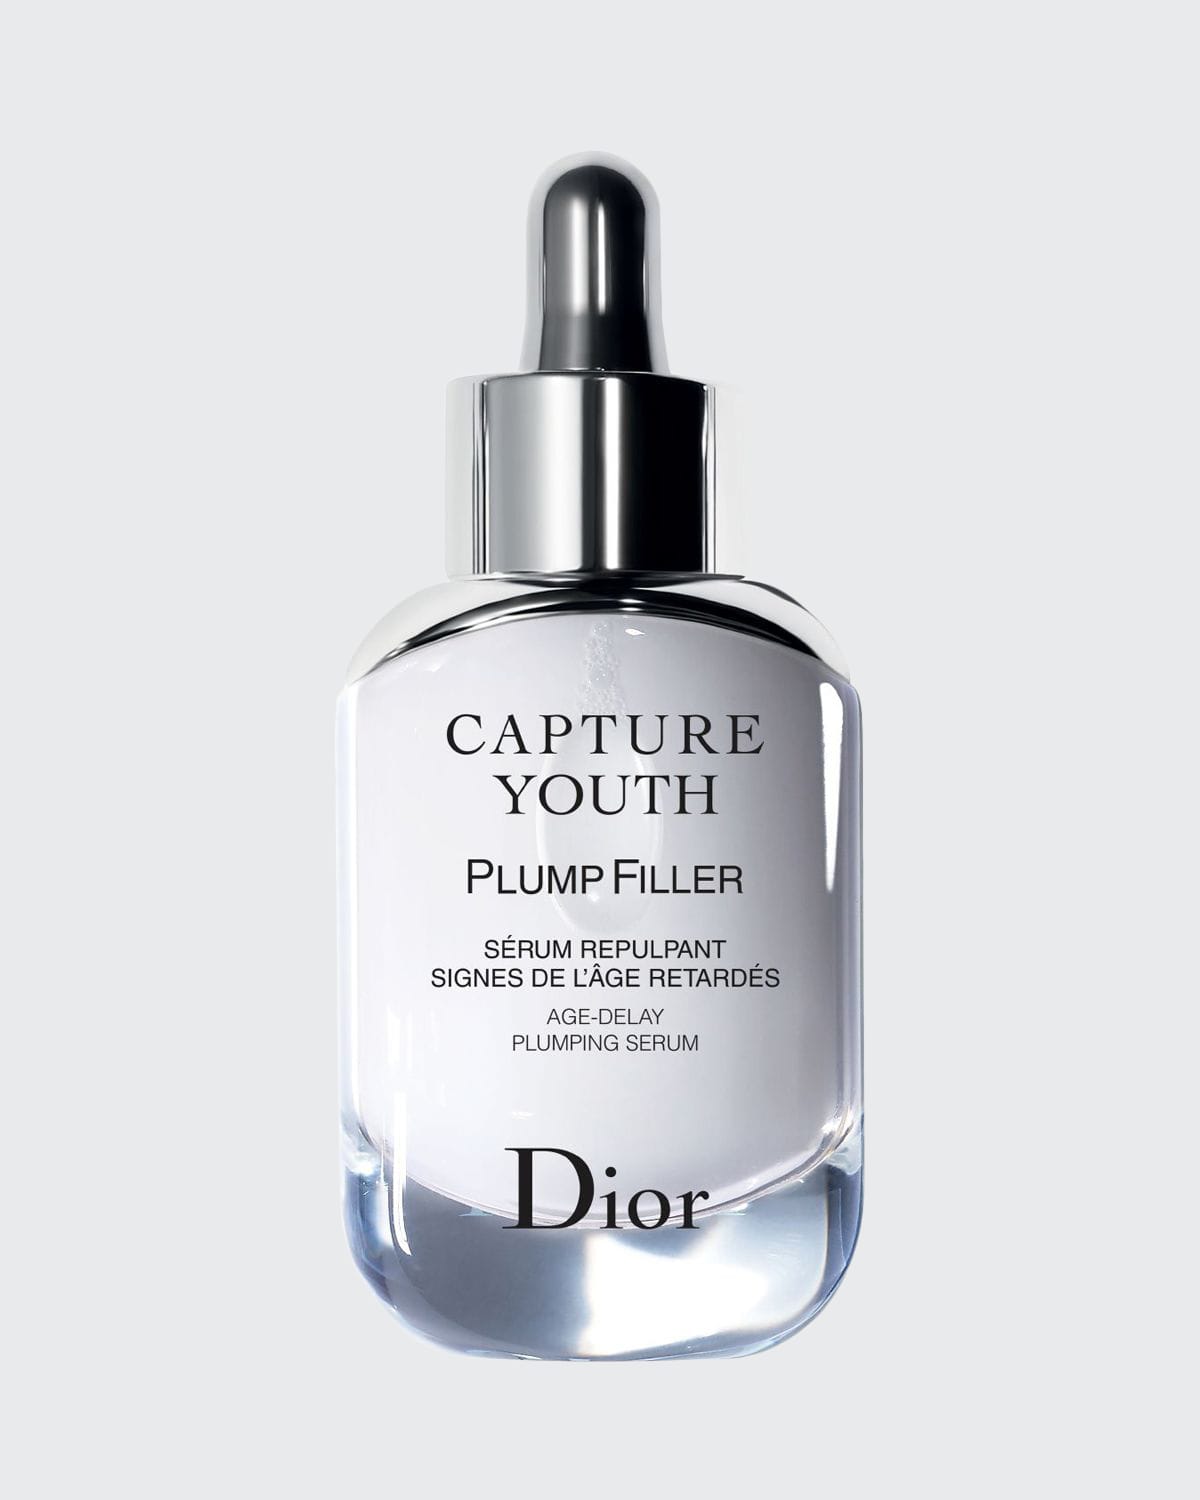 Capture Youth Plump Filter Age-Delay Plumping Serum, 1 oz.